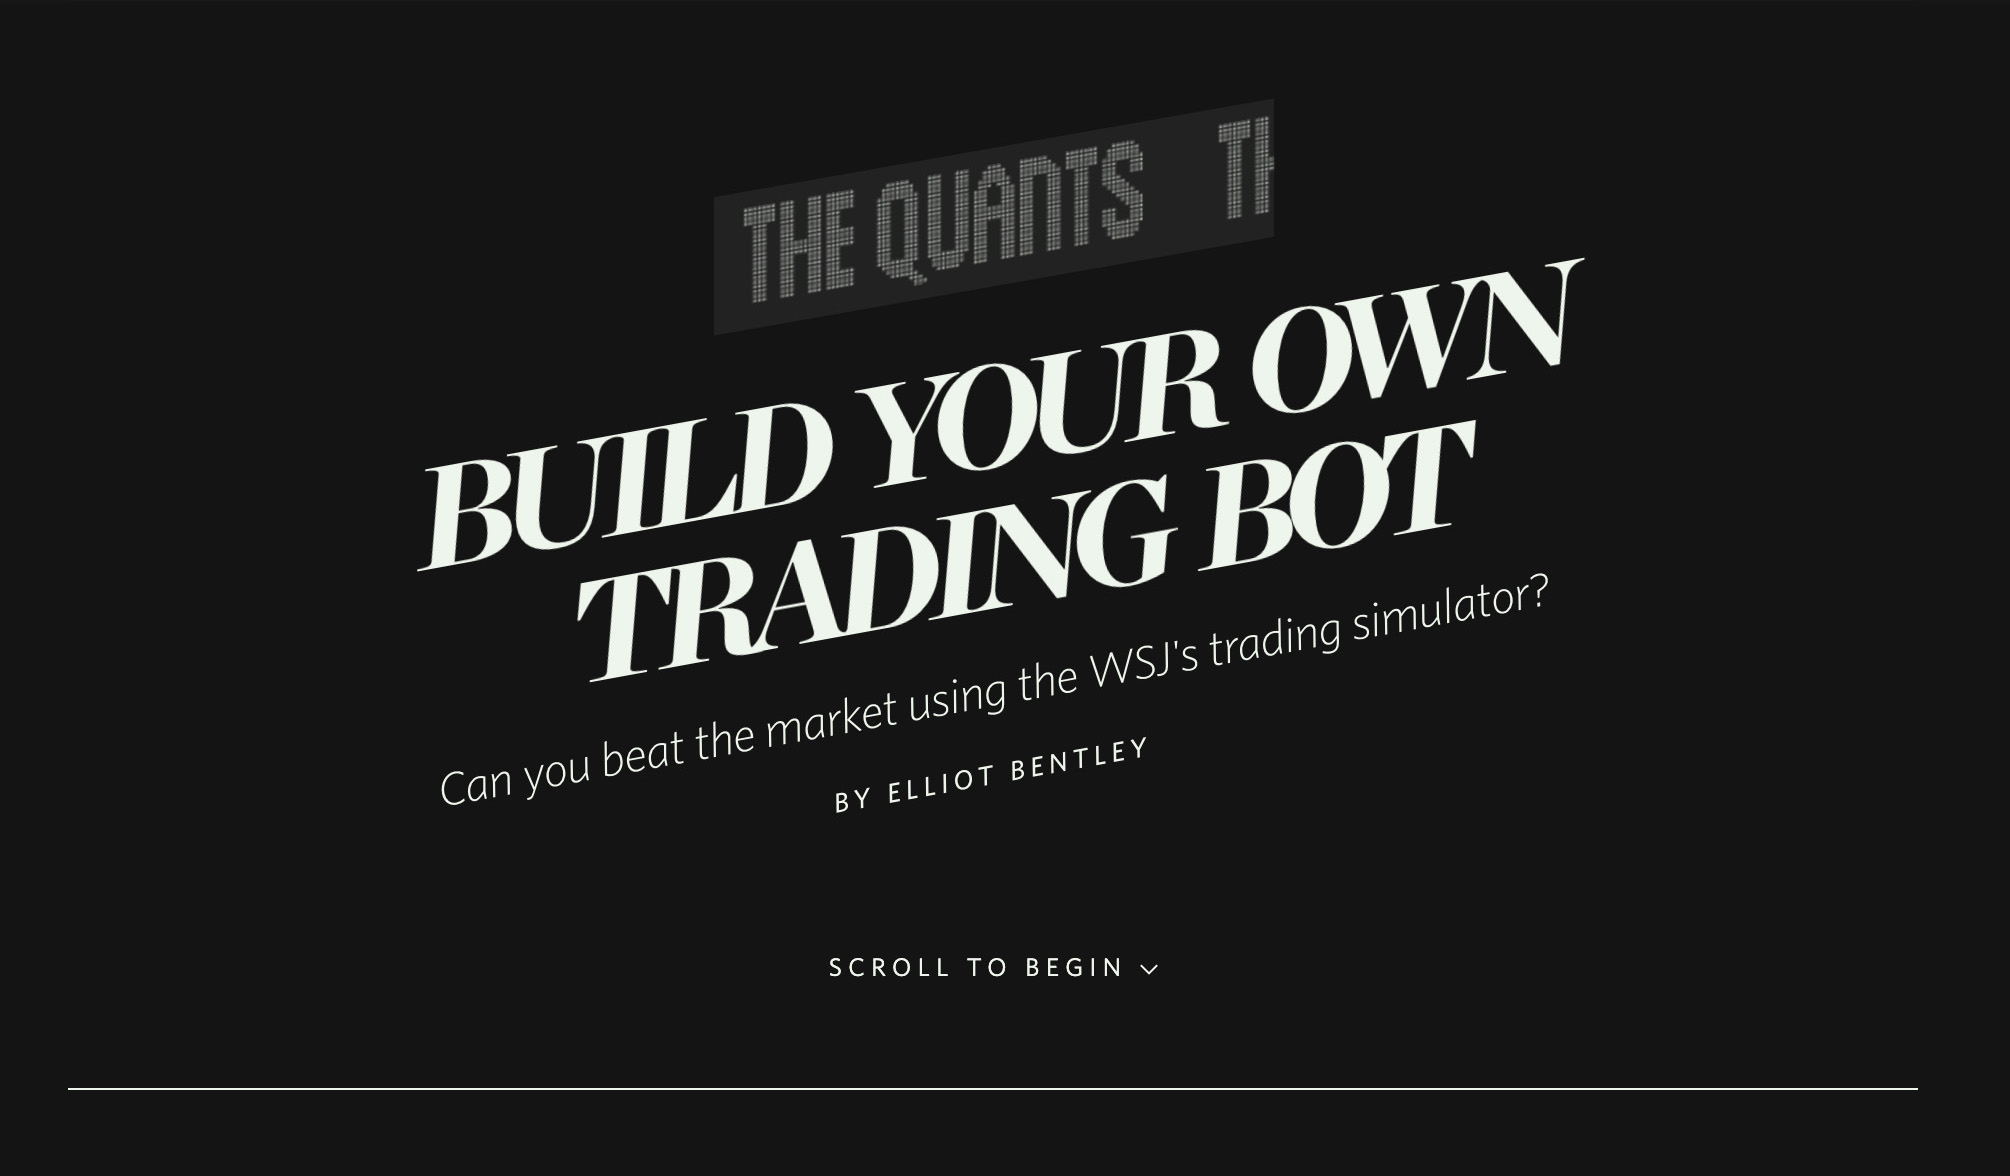 Play to see if you can beat the market by using the Wall Street Journal trading bot 